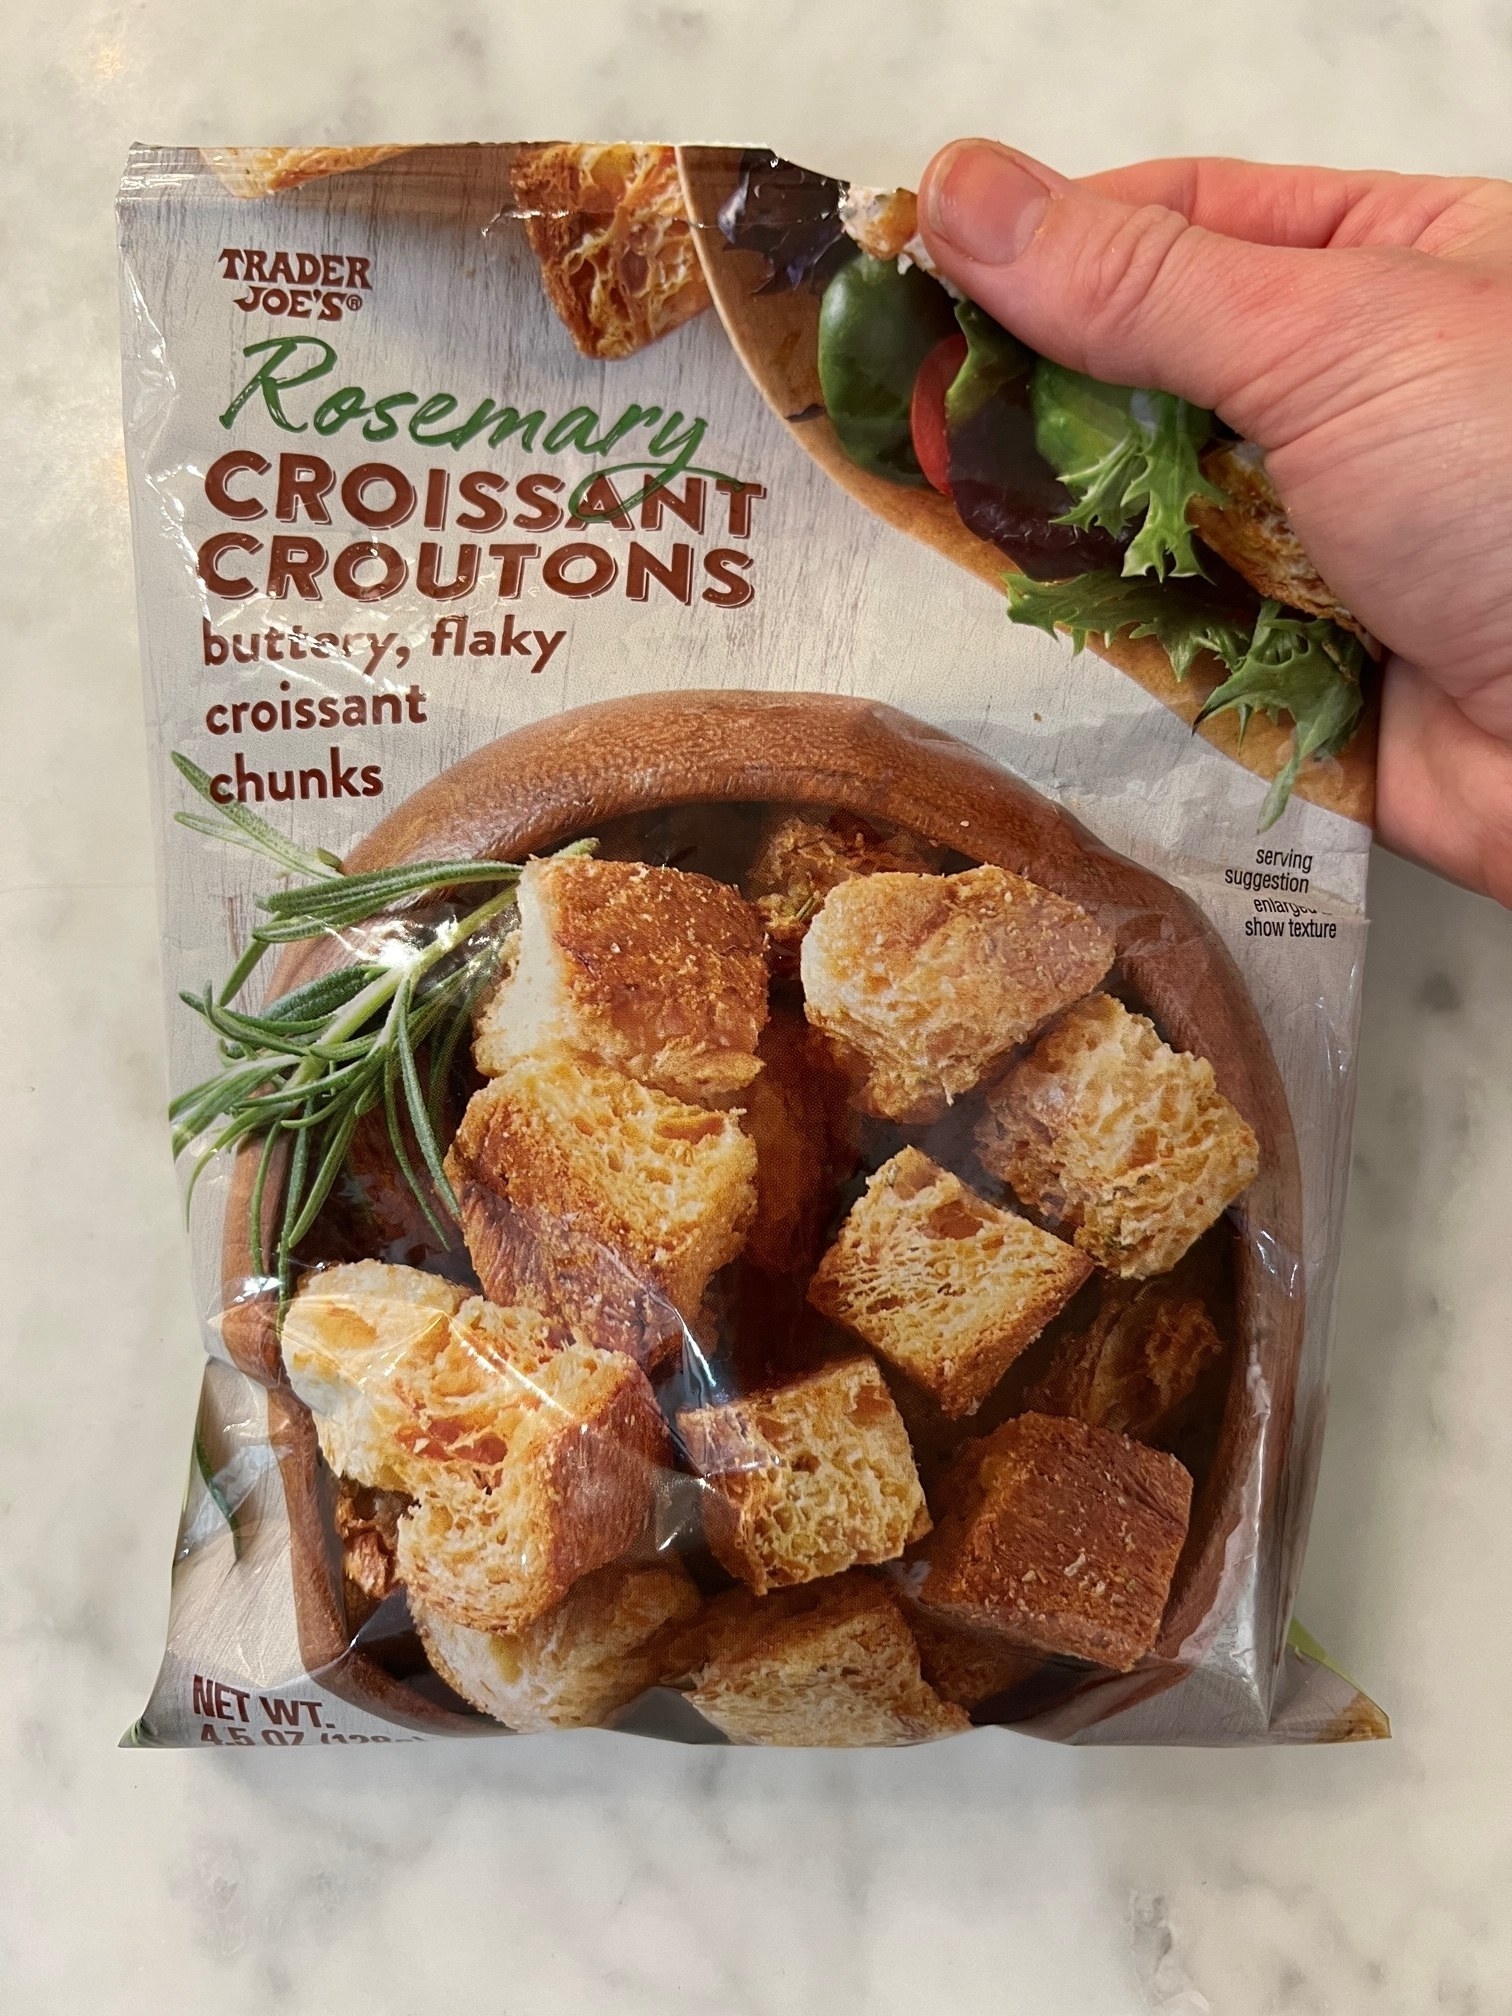 A hand holding a bag of Rosemary Croissant Croutons.